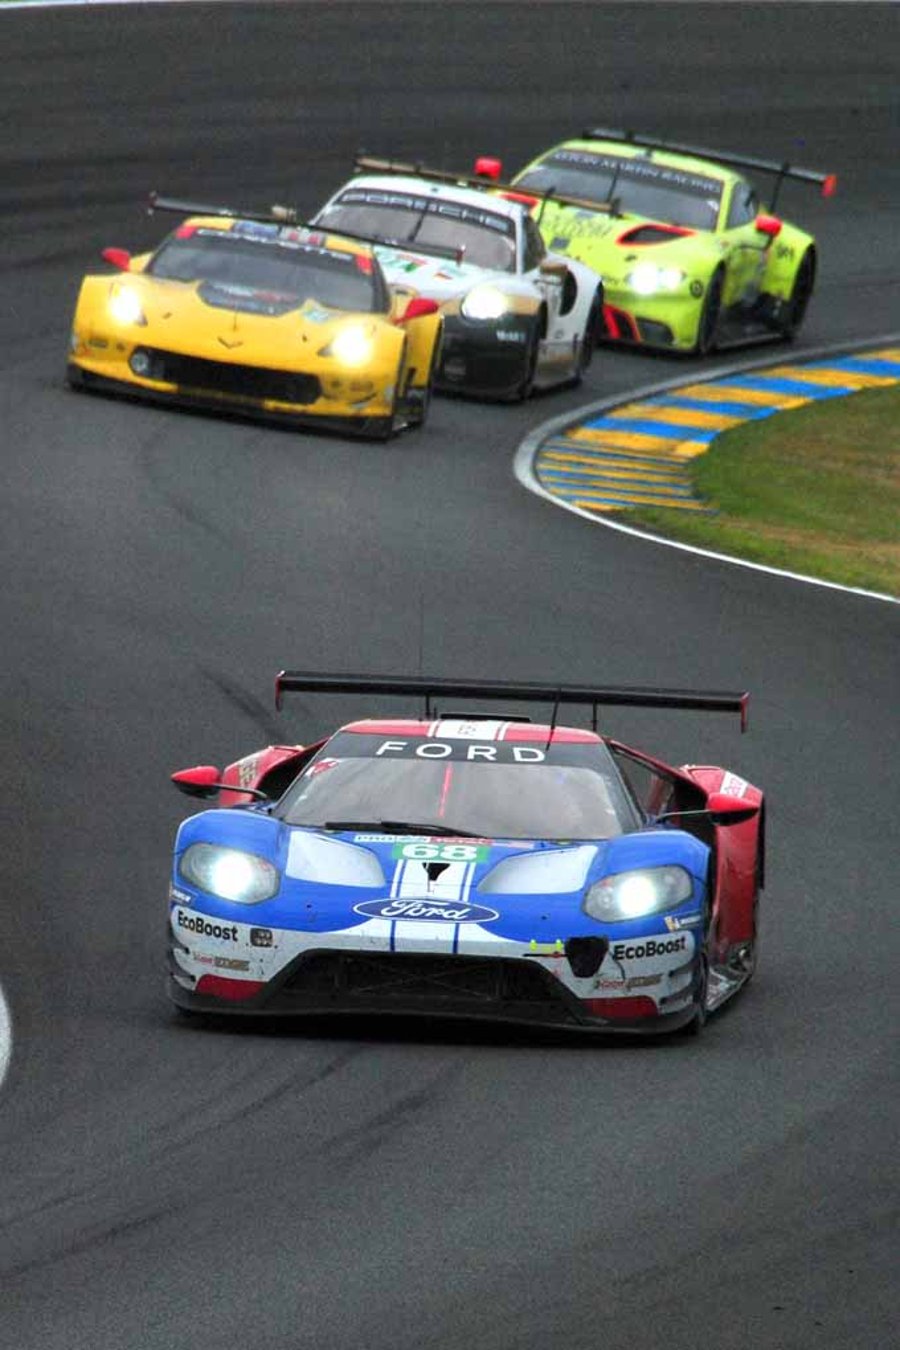 Ford GT no68 24 Hours of Le Mans 2019 Photograph Print